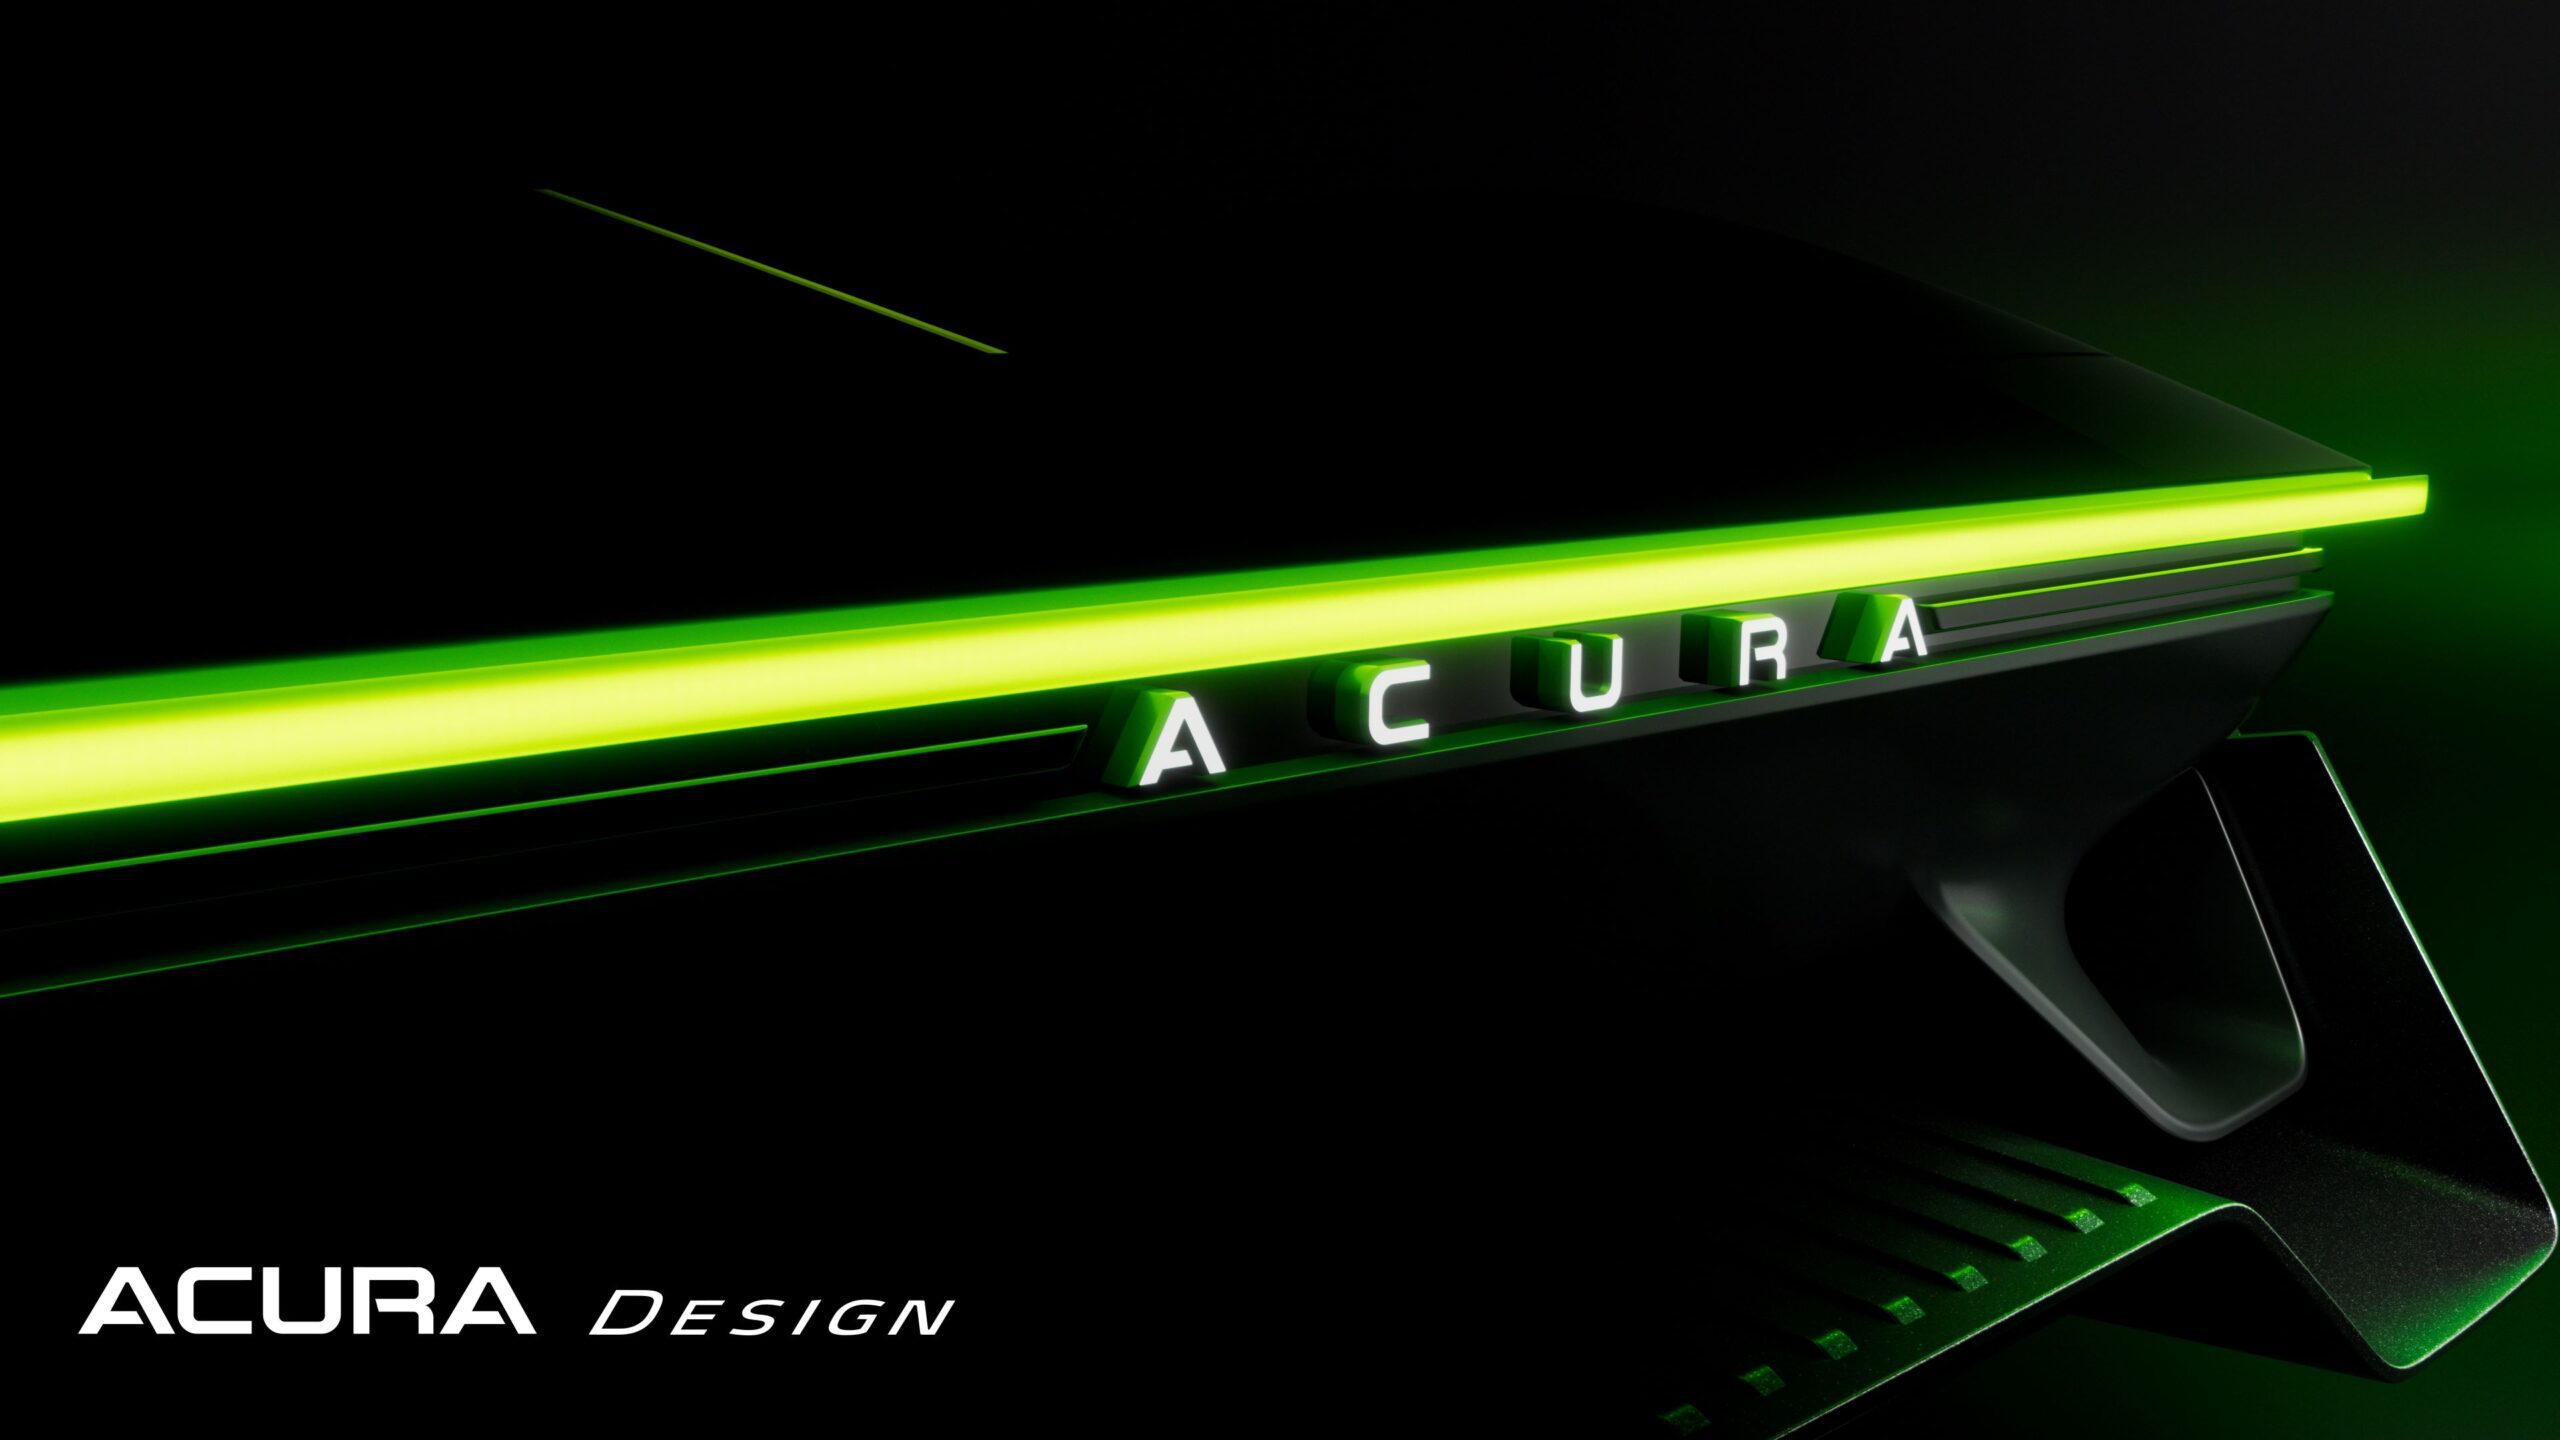 Neon green lighting on the Acura Performance Electric Design concept